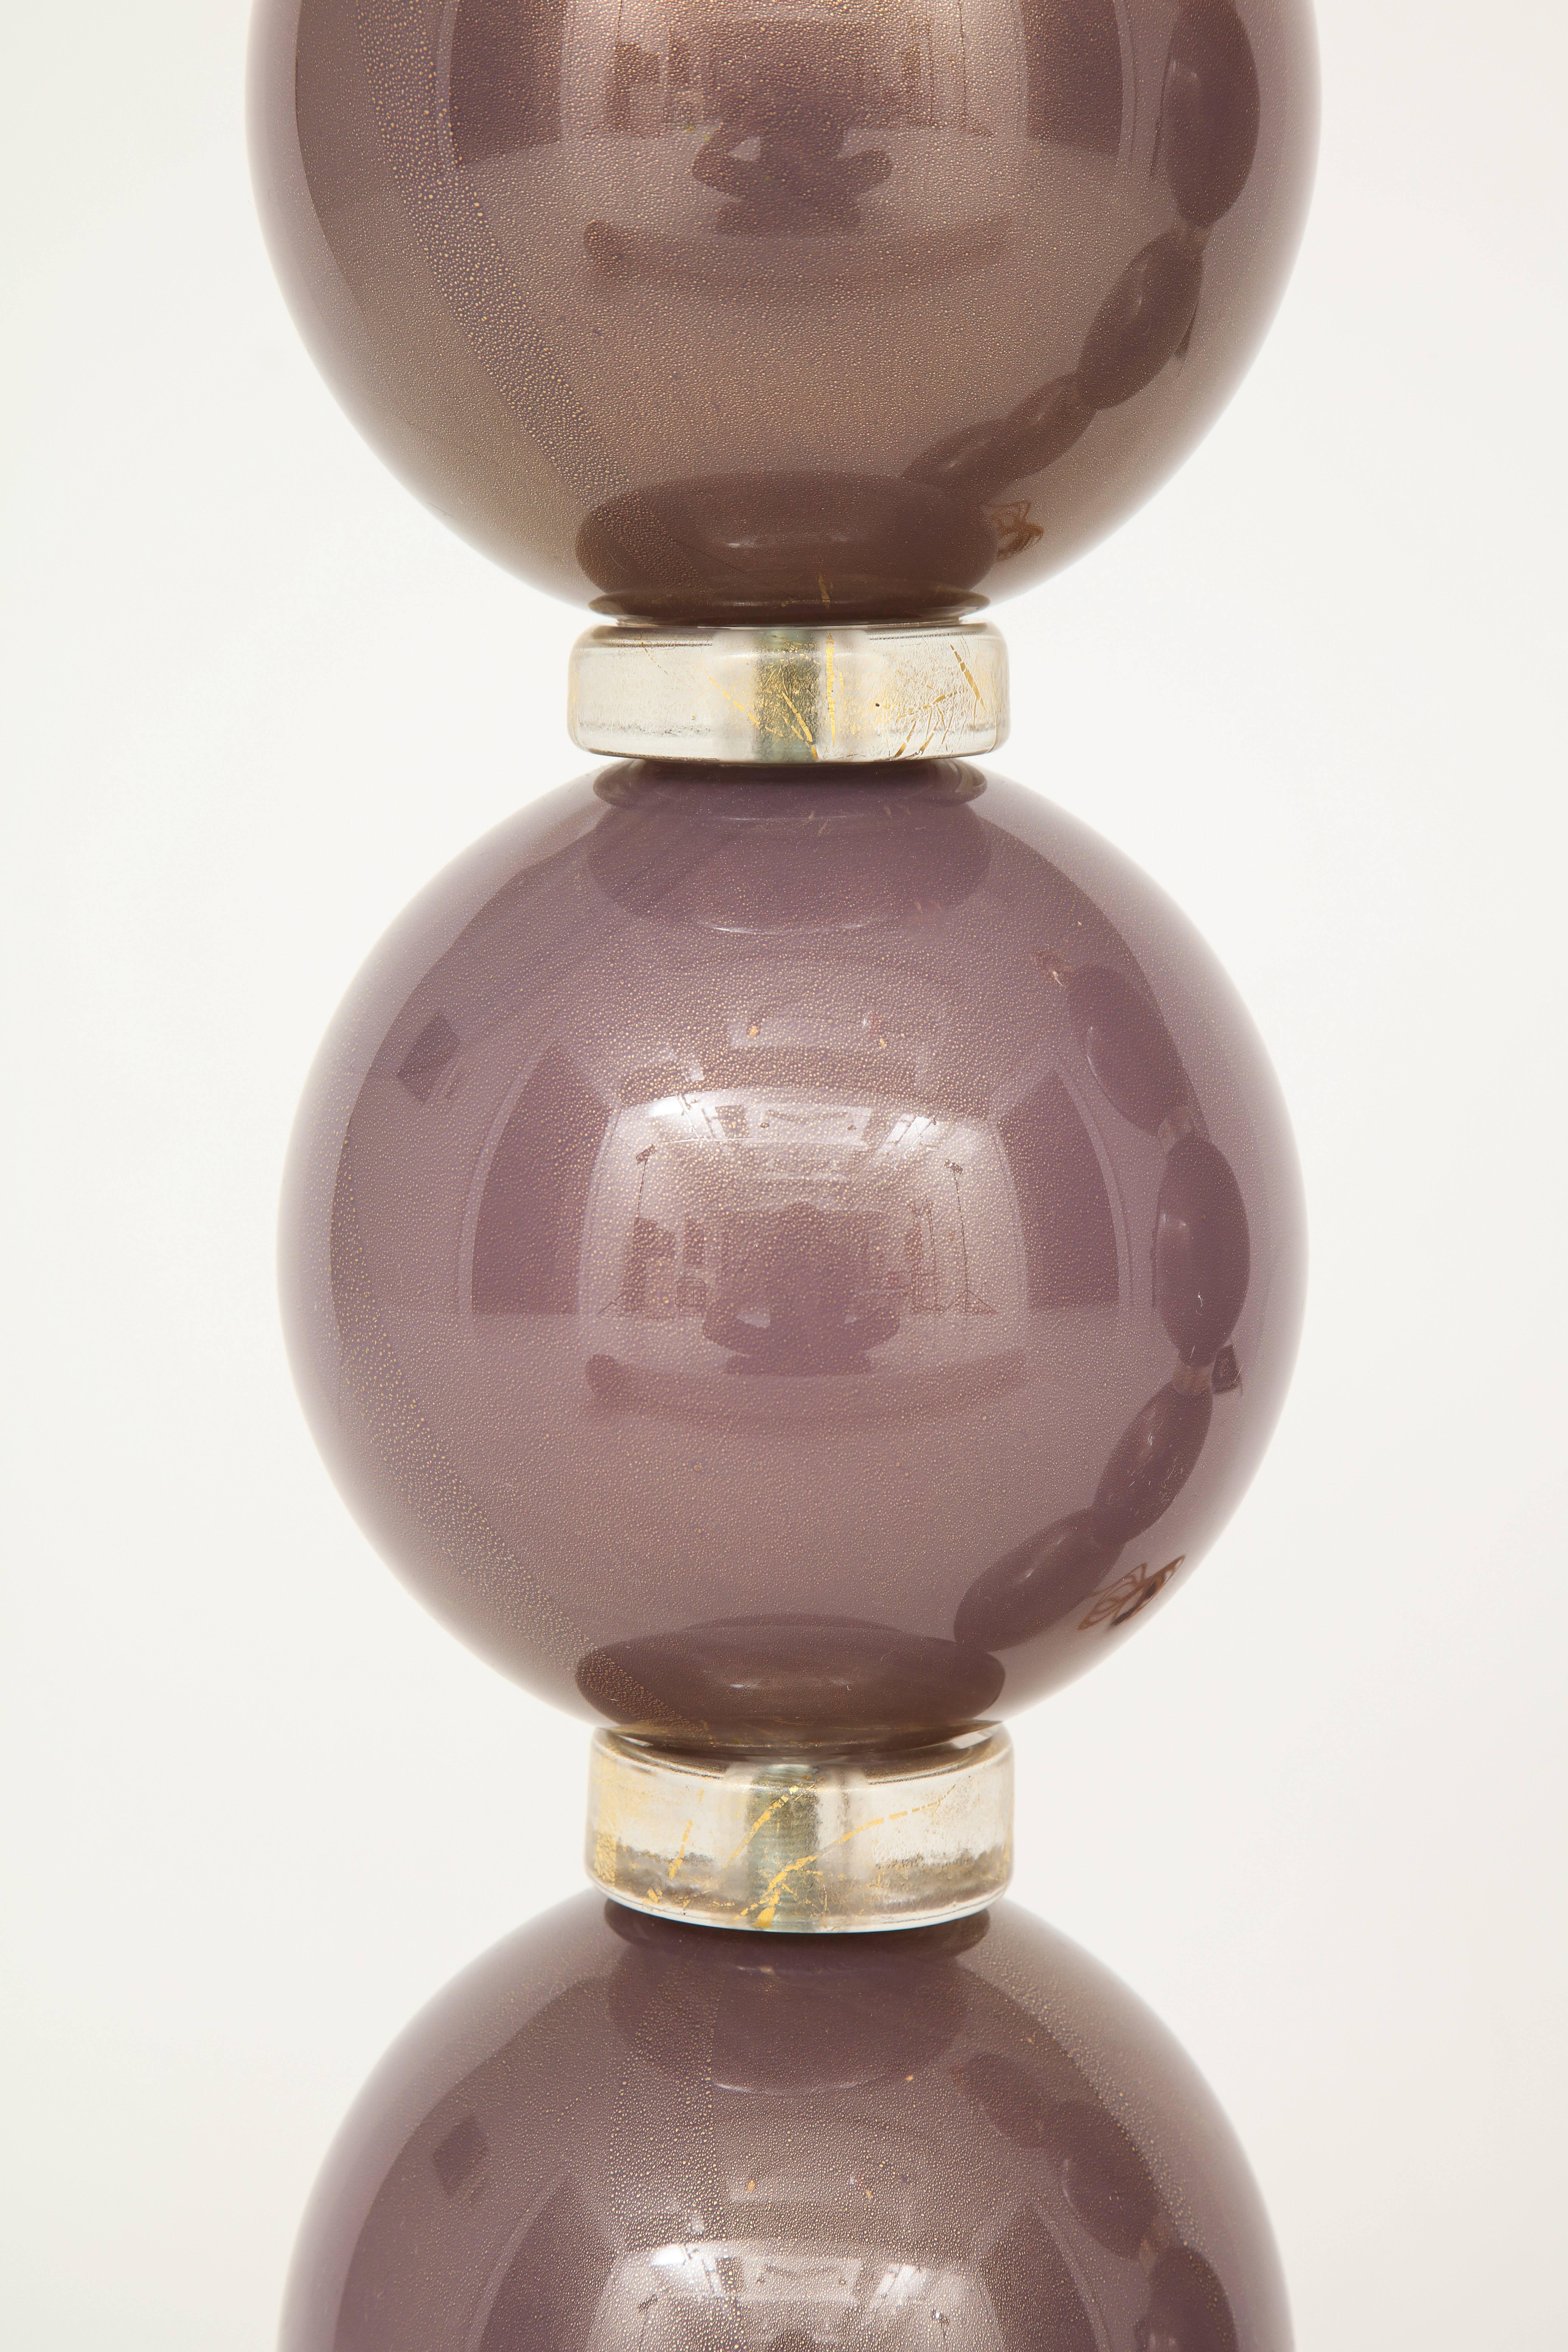 Stunning pair of handblown sphere lamps with rings. The “incamisciato” layered purple or amethyst spheres are separated by clear glass rings infused with 23-carat gold. Signed by the Glass Master himself. The height below includes light socket. This